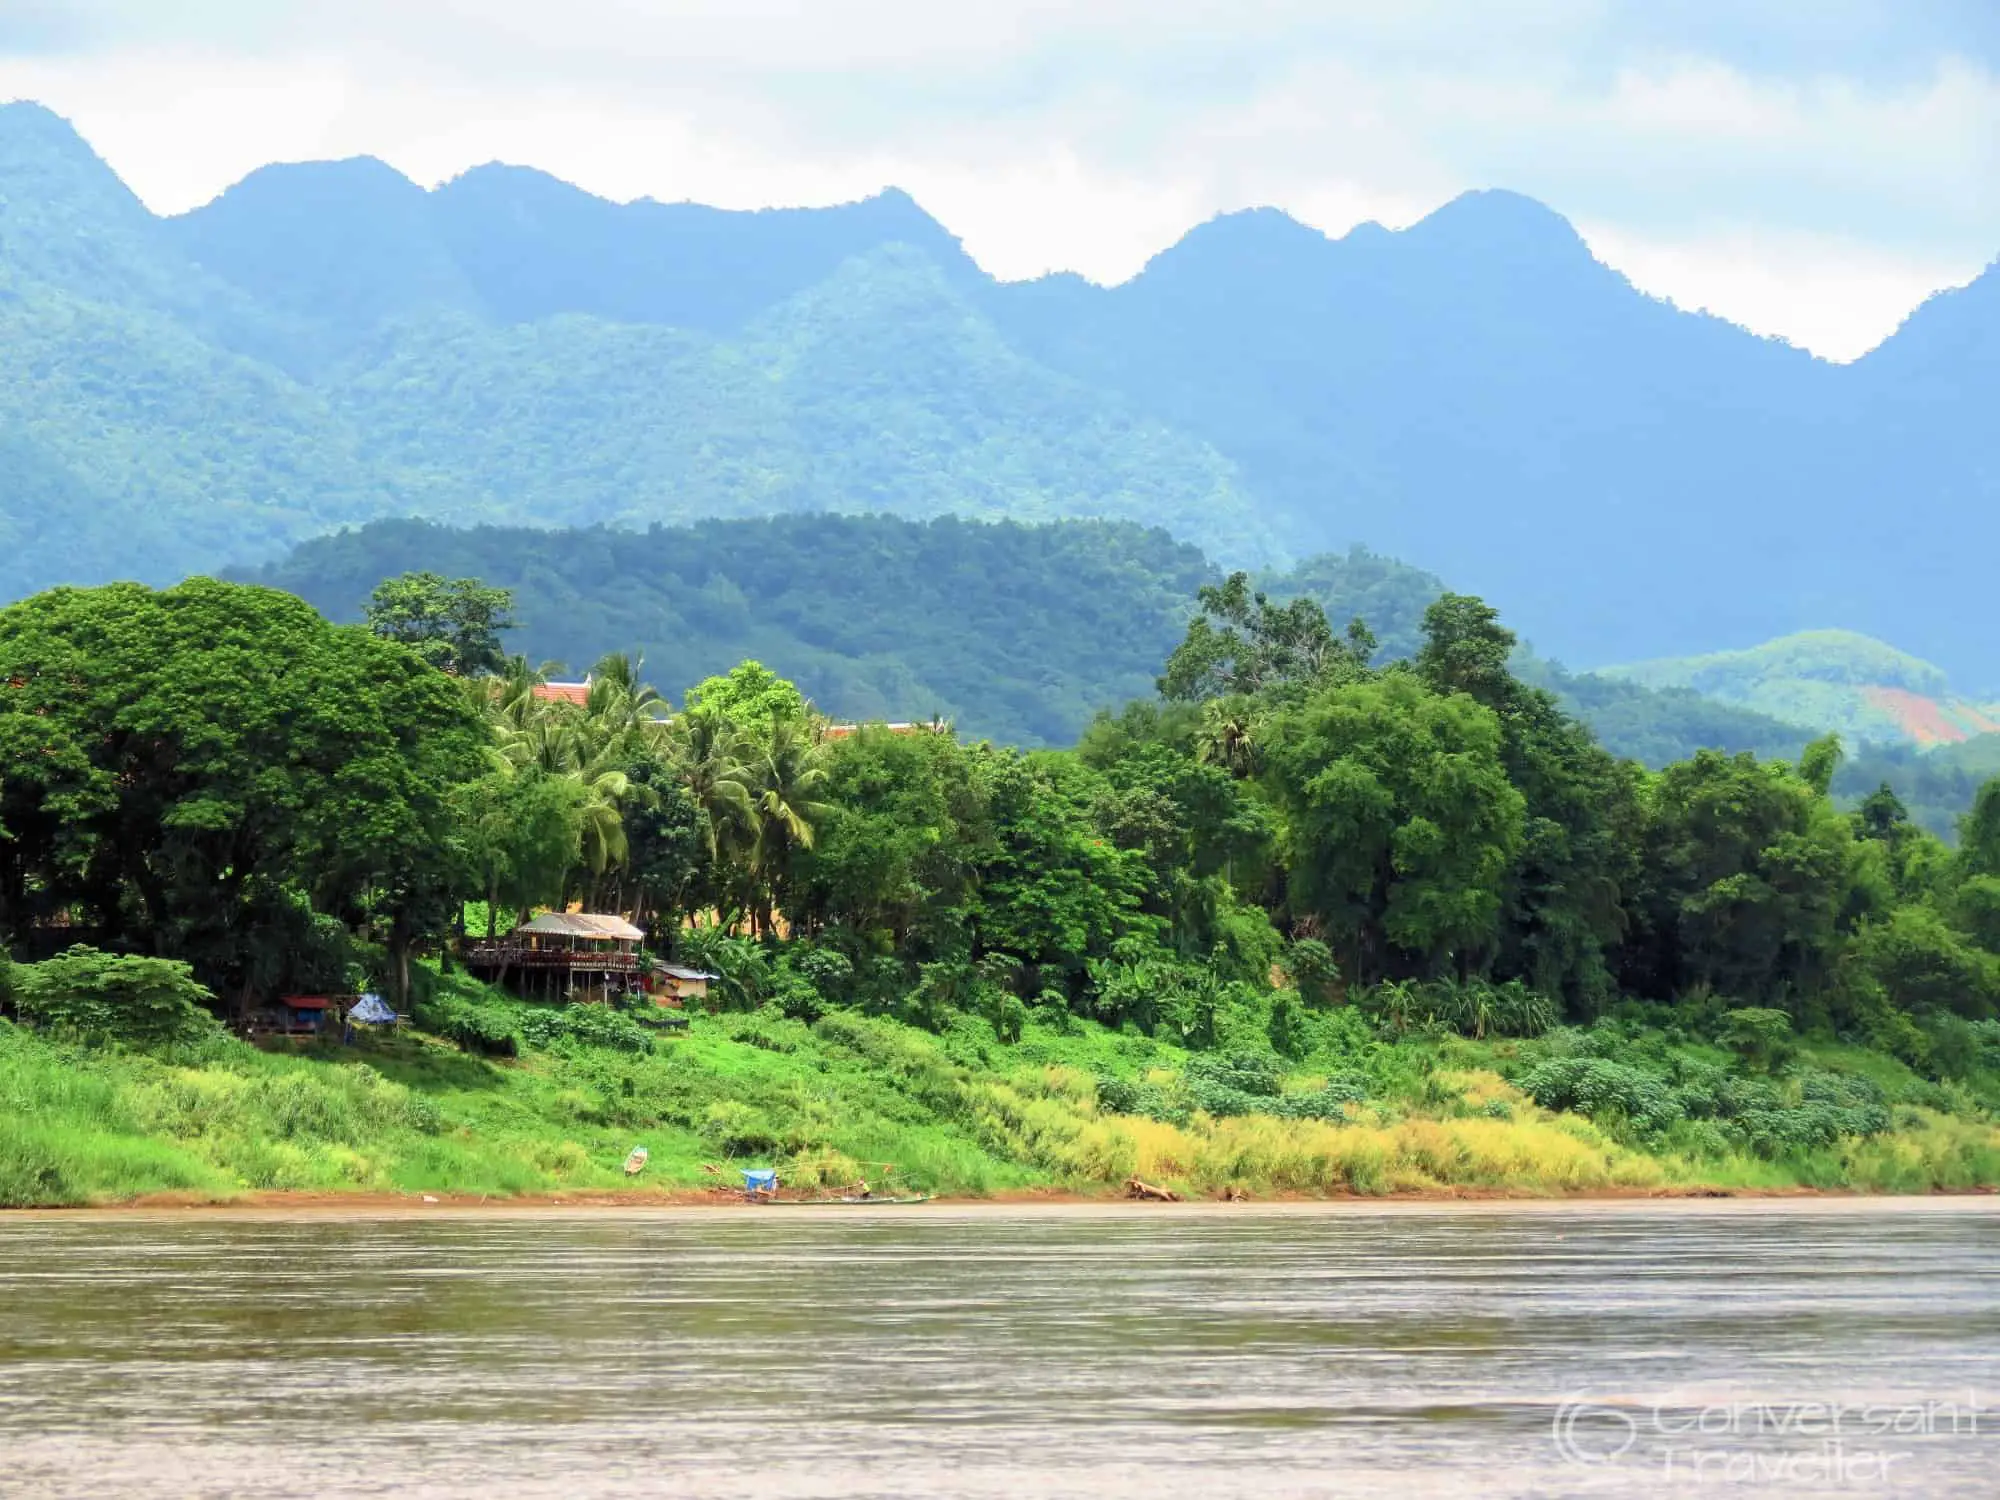 Views from not-too-slow boat down the mightly Mekong,Laos